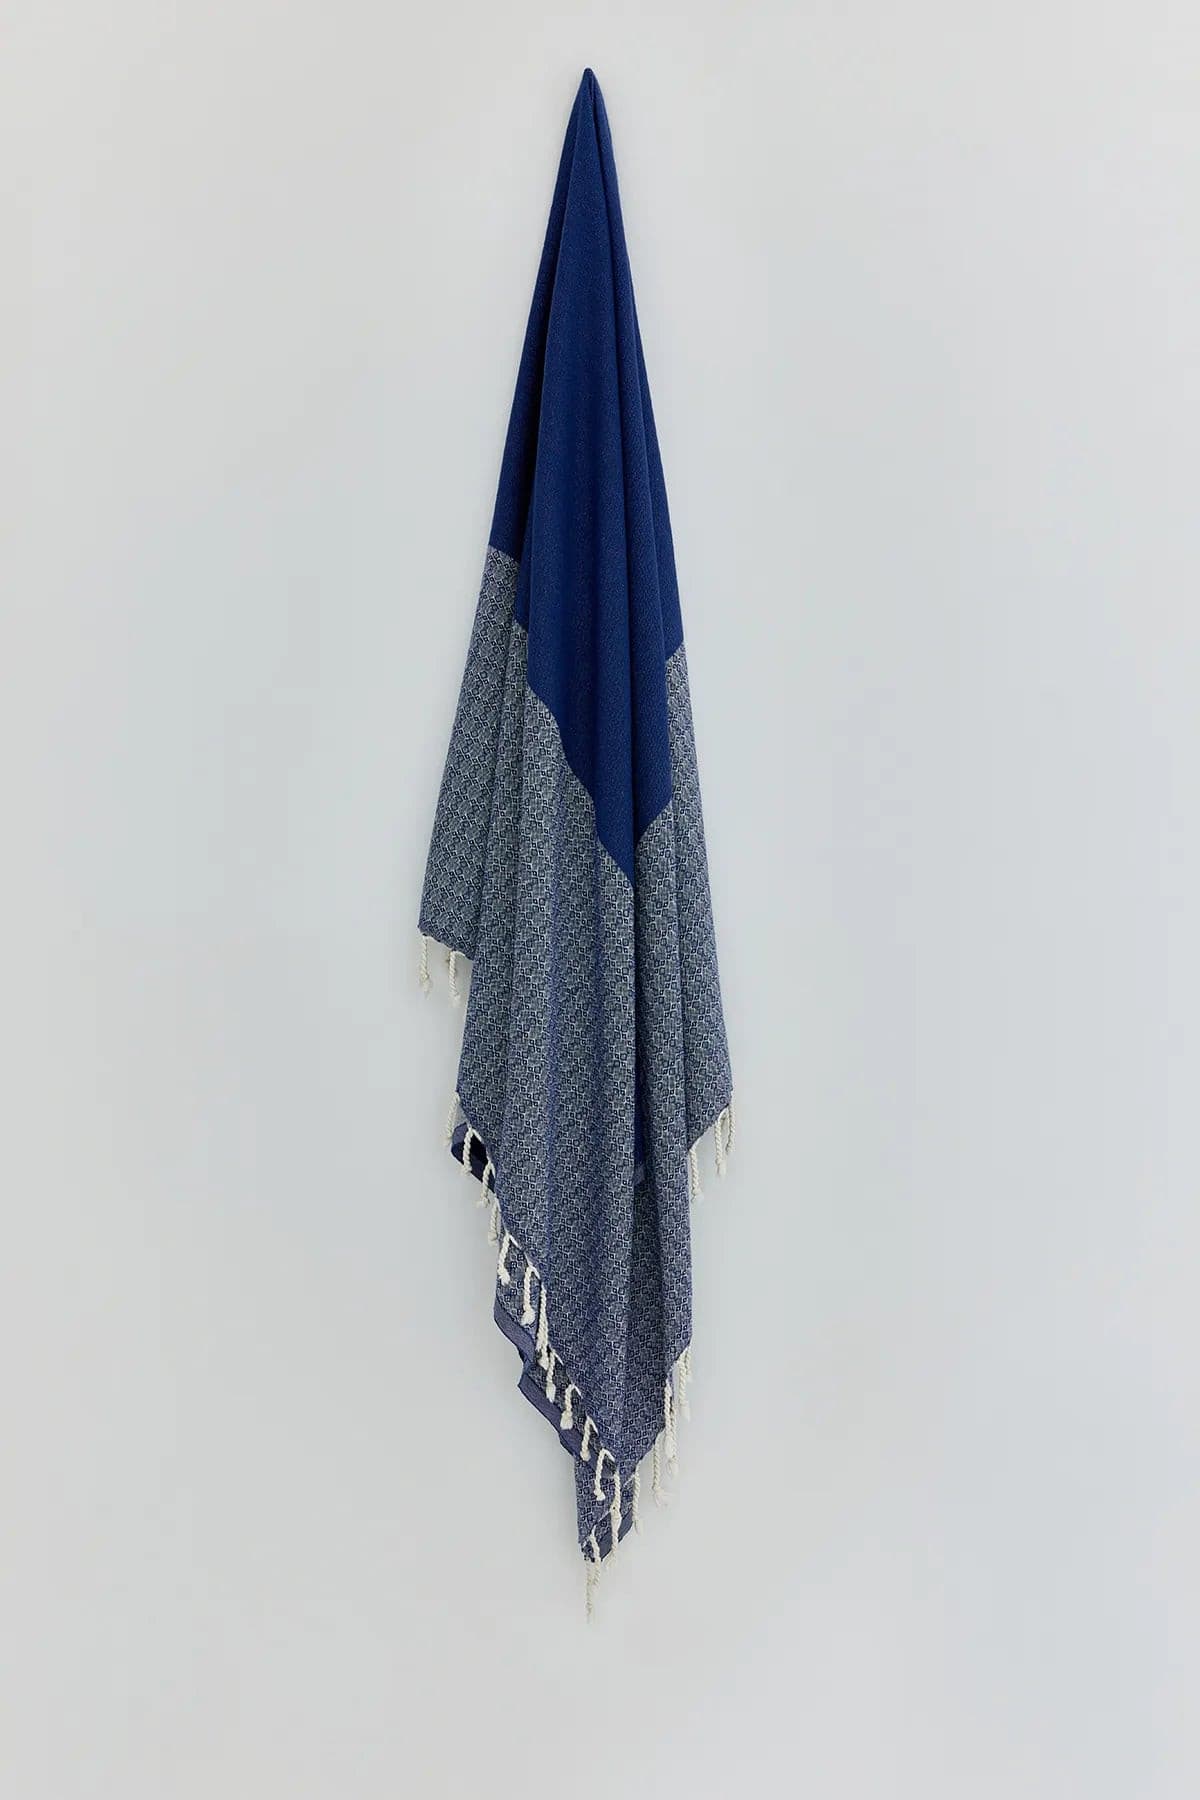 Beach/Bath,living place,Indigo,Turkish towel,hanged,summer,line patterned,double-faces,purified sand,light,compact, easy pack,fun, recycled,double color,diamond,eastern flare